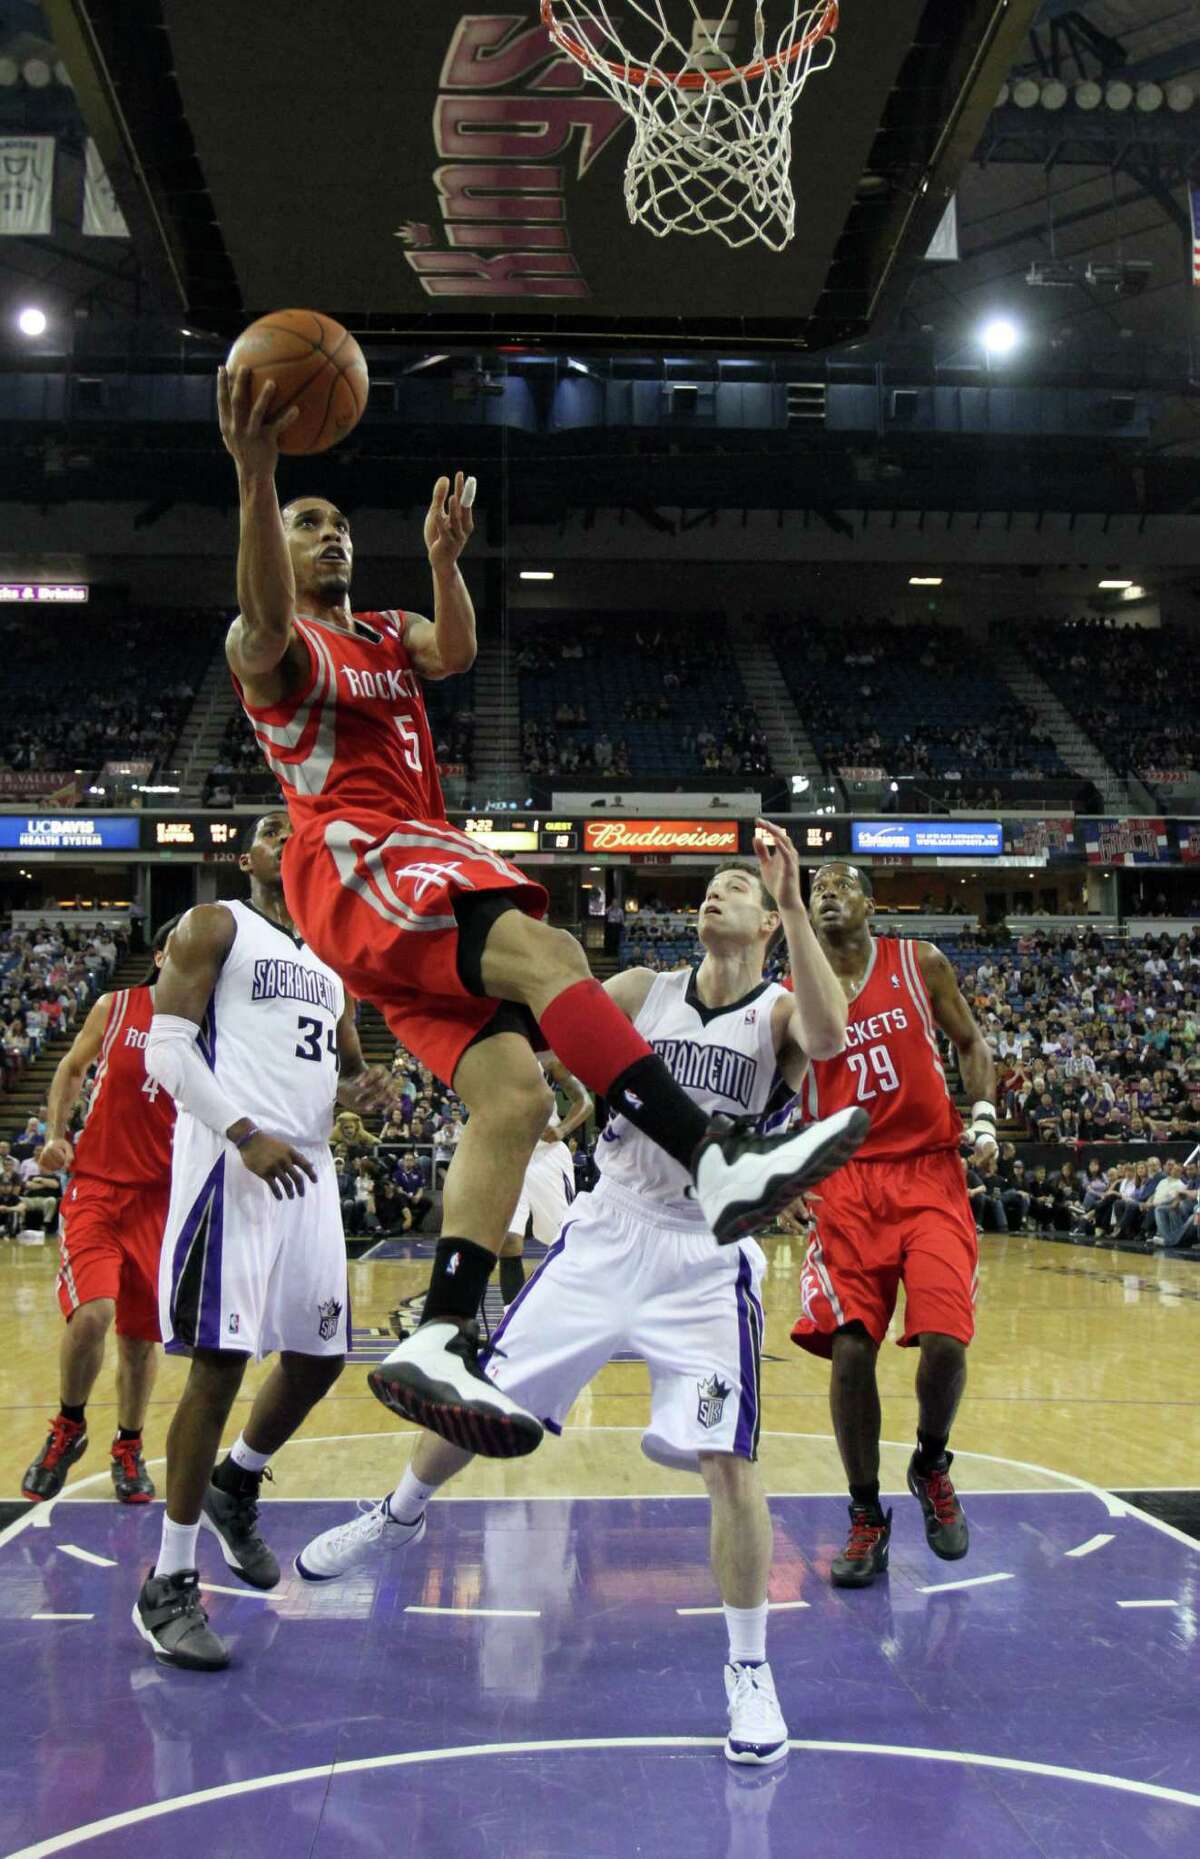 Houston Rockets guard Courtney Lee, left, goes to the basket against Sacramento Kings guard Jimmer Fredette, right, during the first quarter of an NBA basketball game in Sacramento, Calif., Sunday, April 8, 2012.(AP Photo/Rich Pedroncelli)